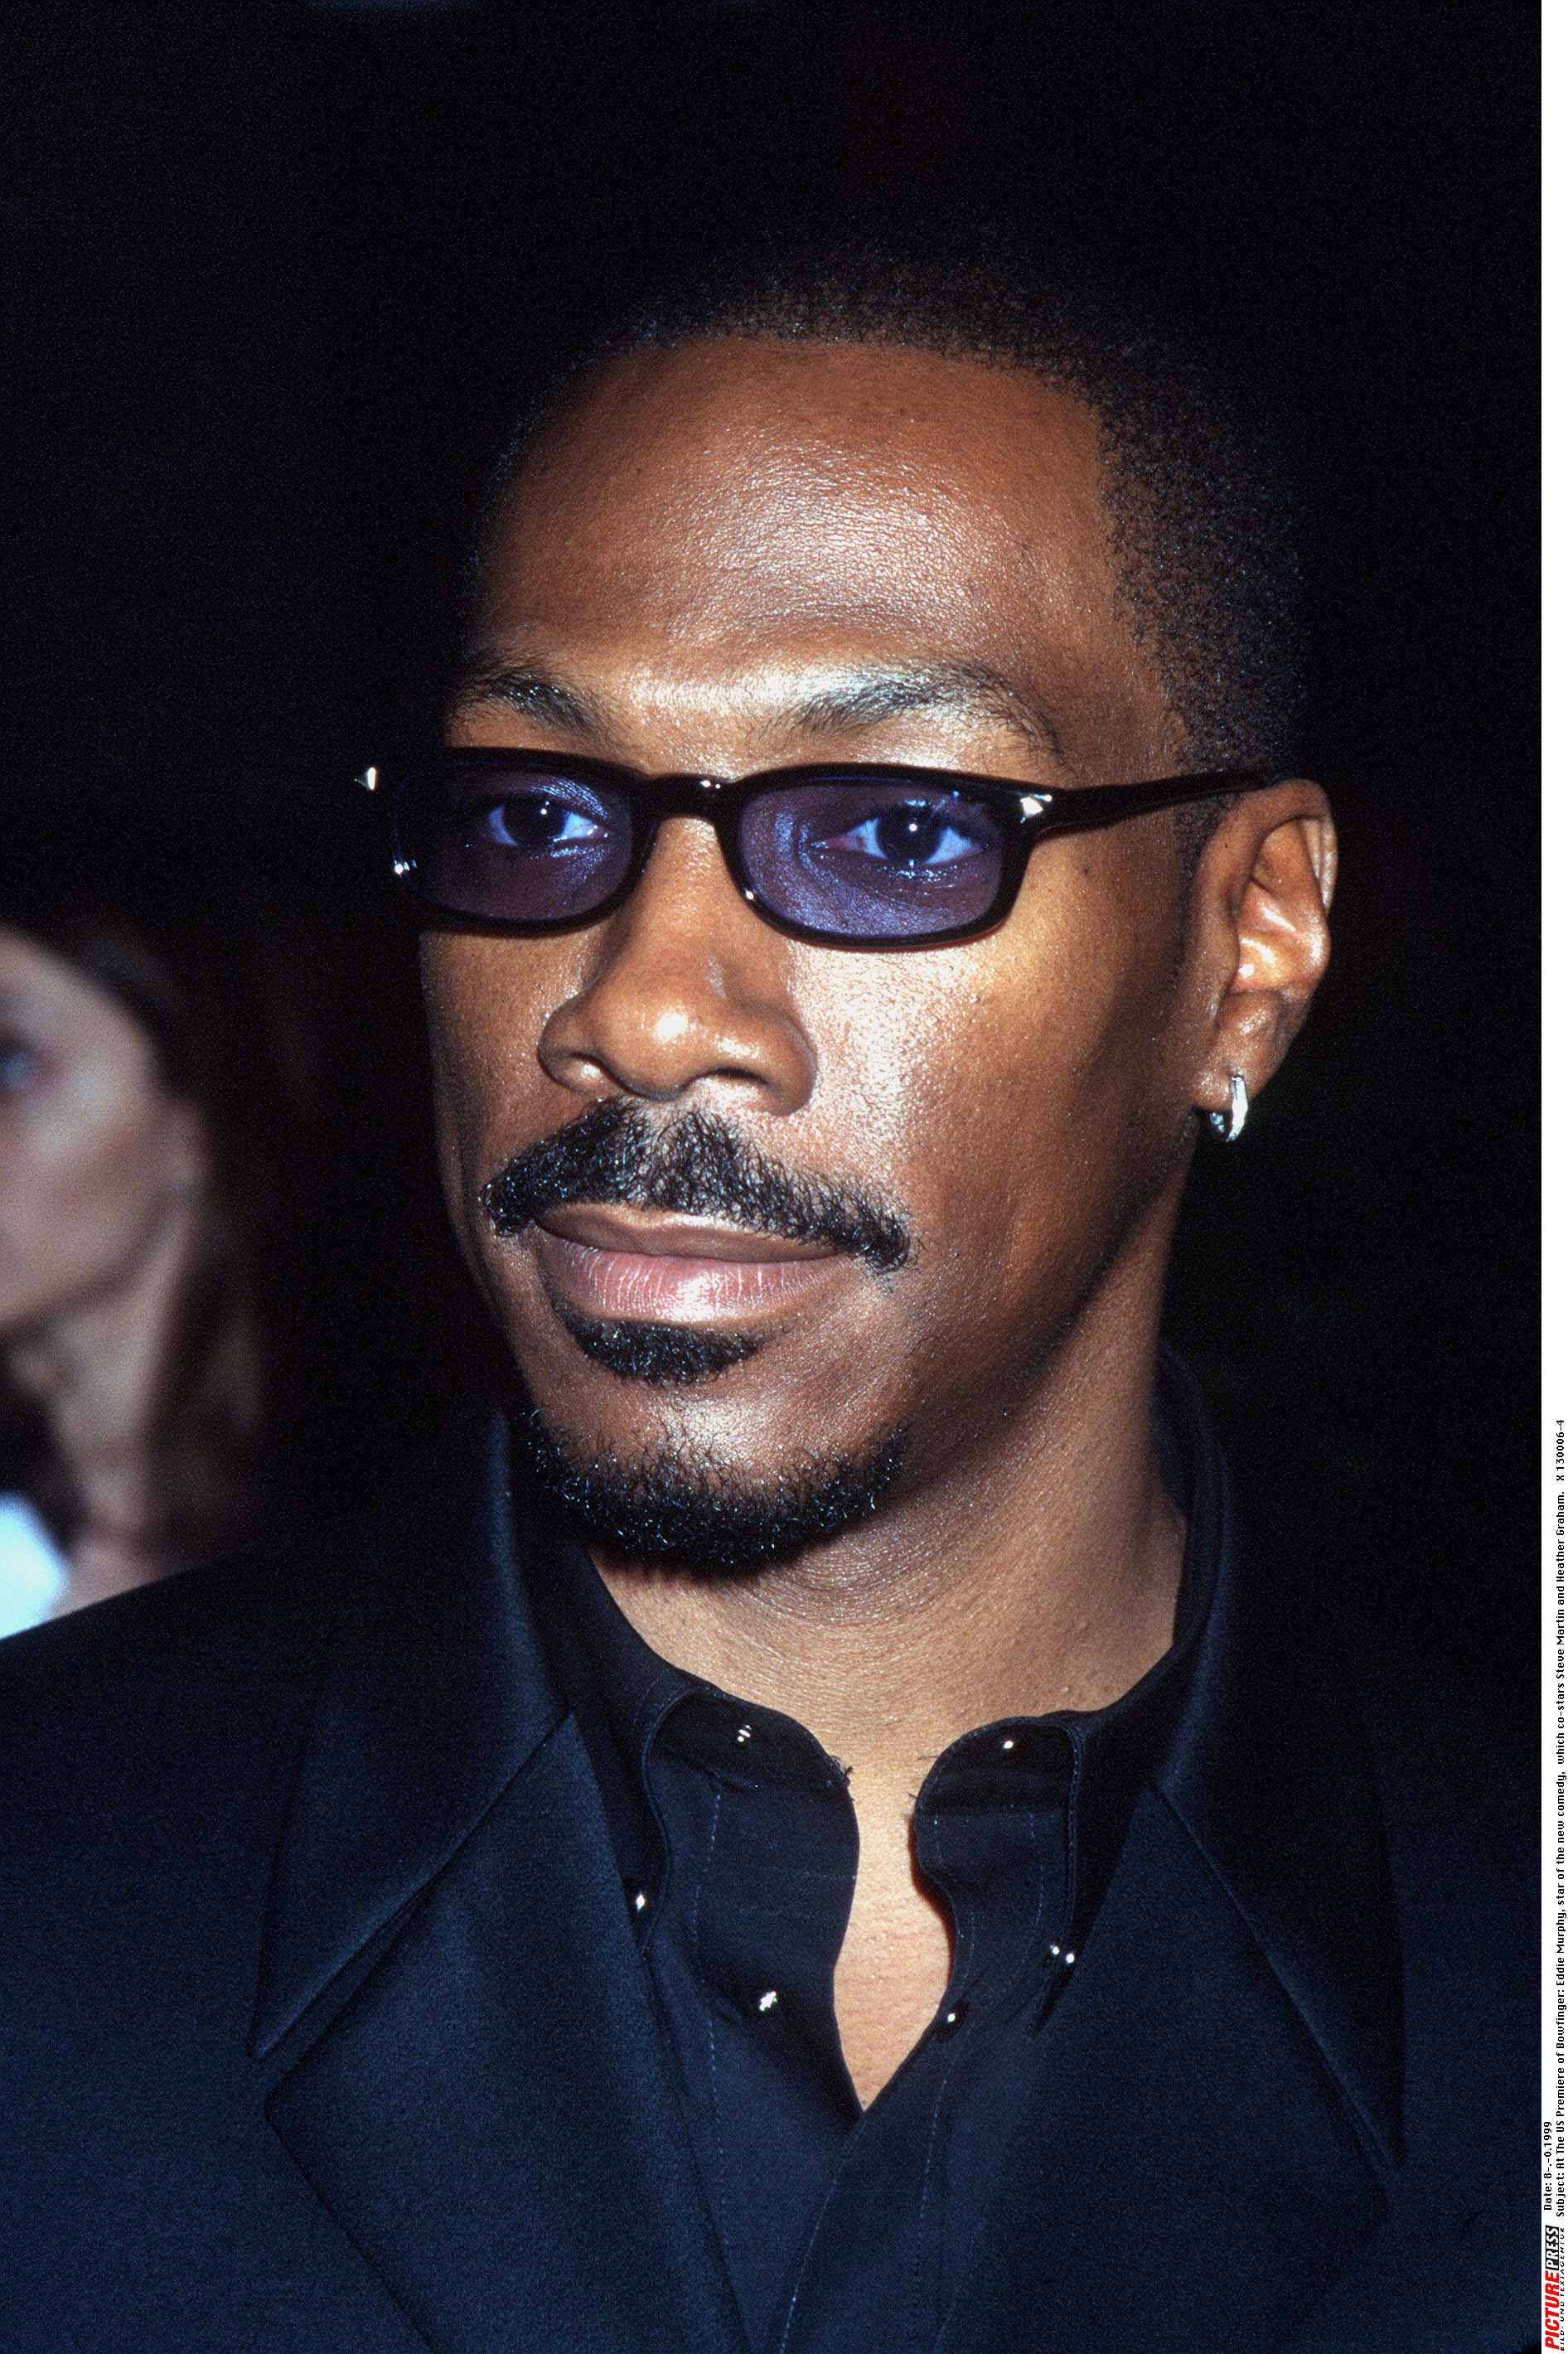 Eddie Murphy Image HD Wallpaper And Background